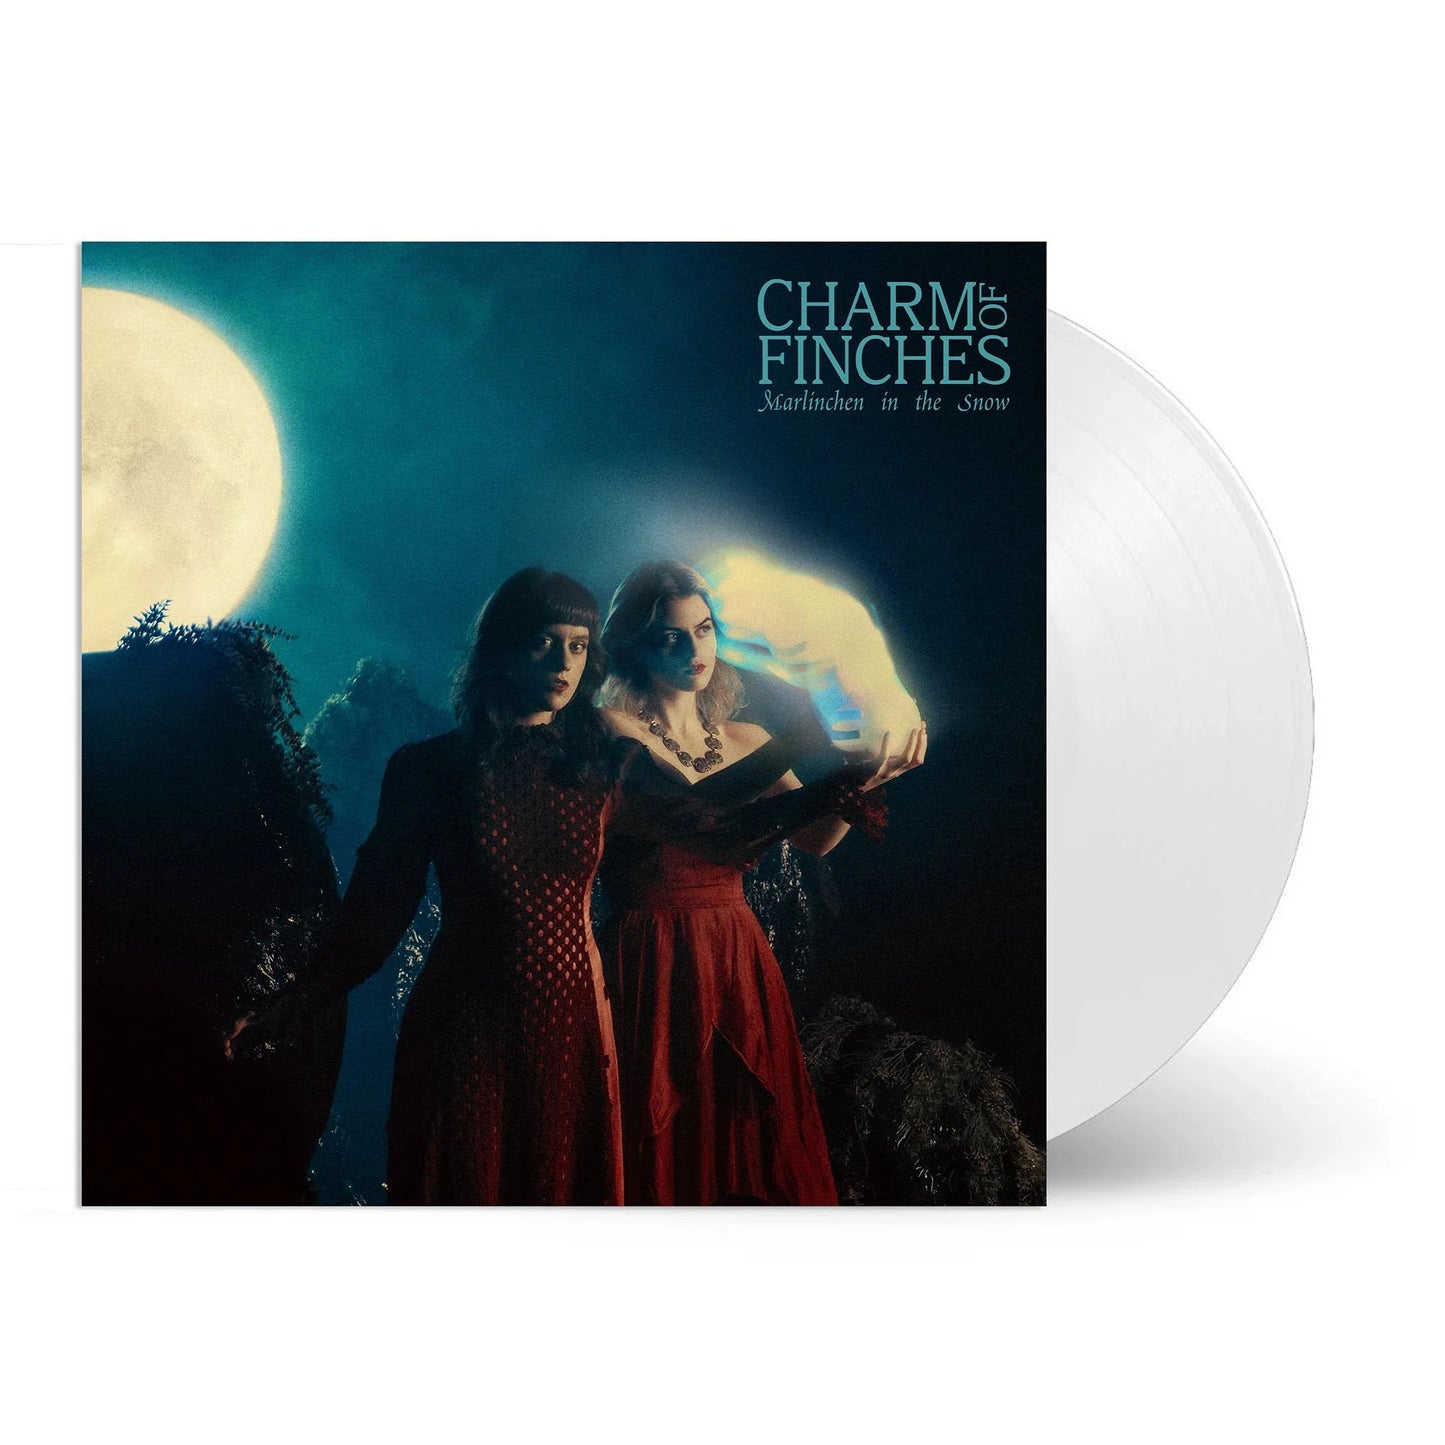 Charm Of Finches - Marlinchen In The Snow [Vinyl]